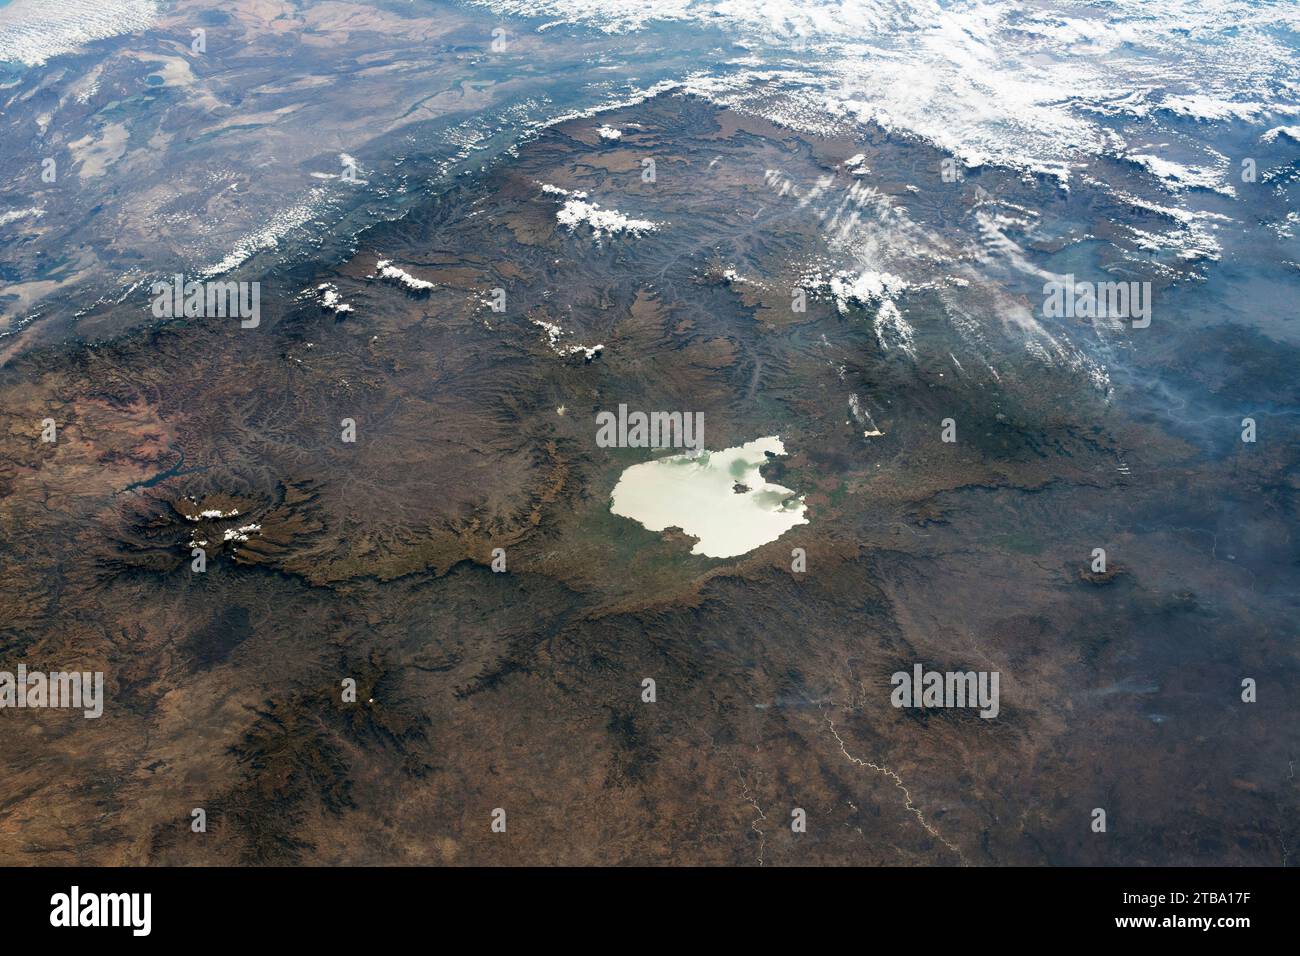 View from space of Lake Tana and the Ethiopian Highlands. Stock Photo